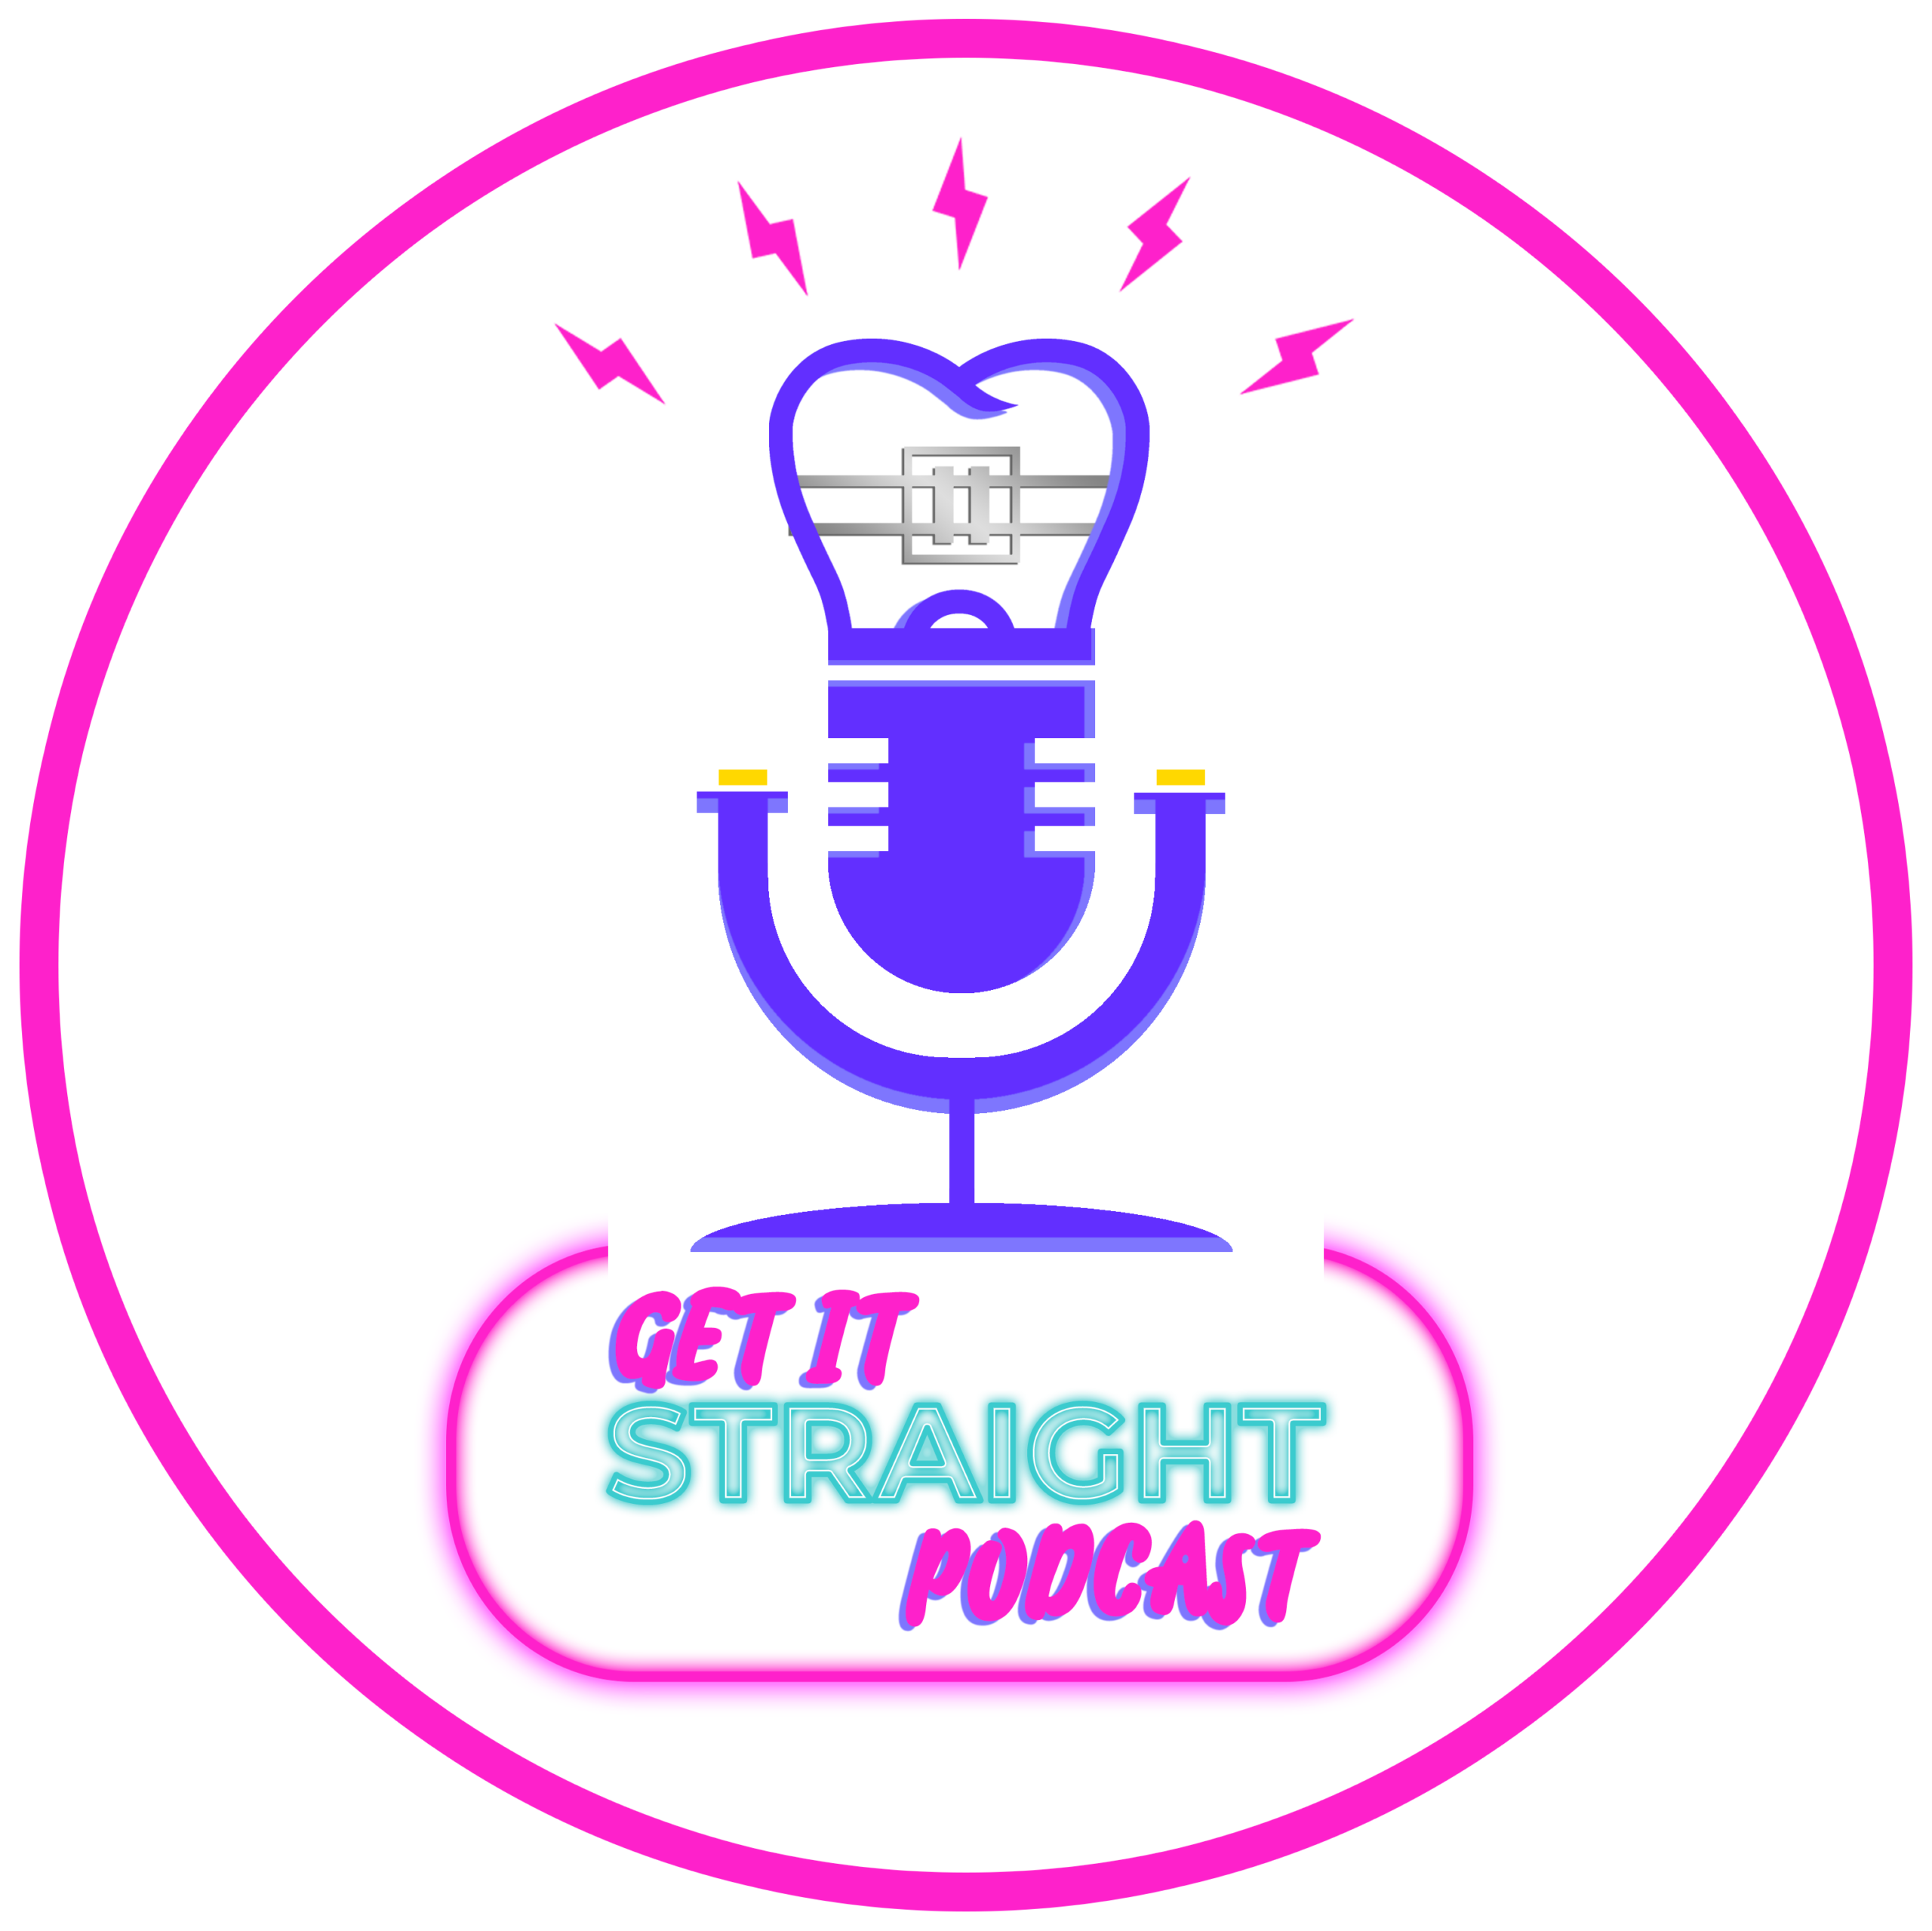 Get It Straight Podcast Enclosed